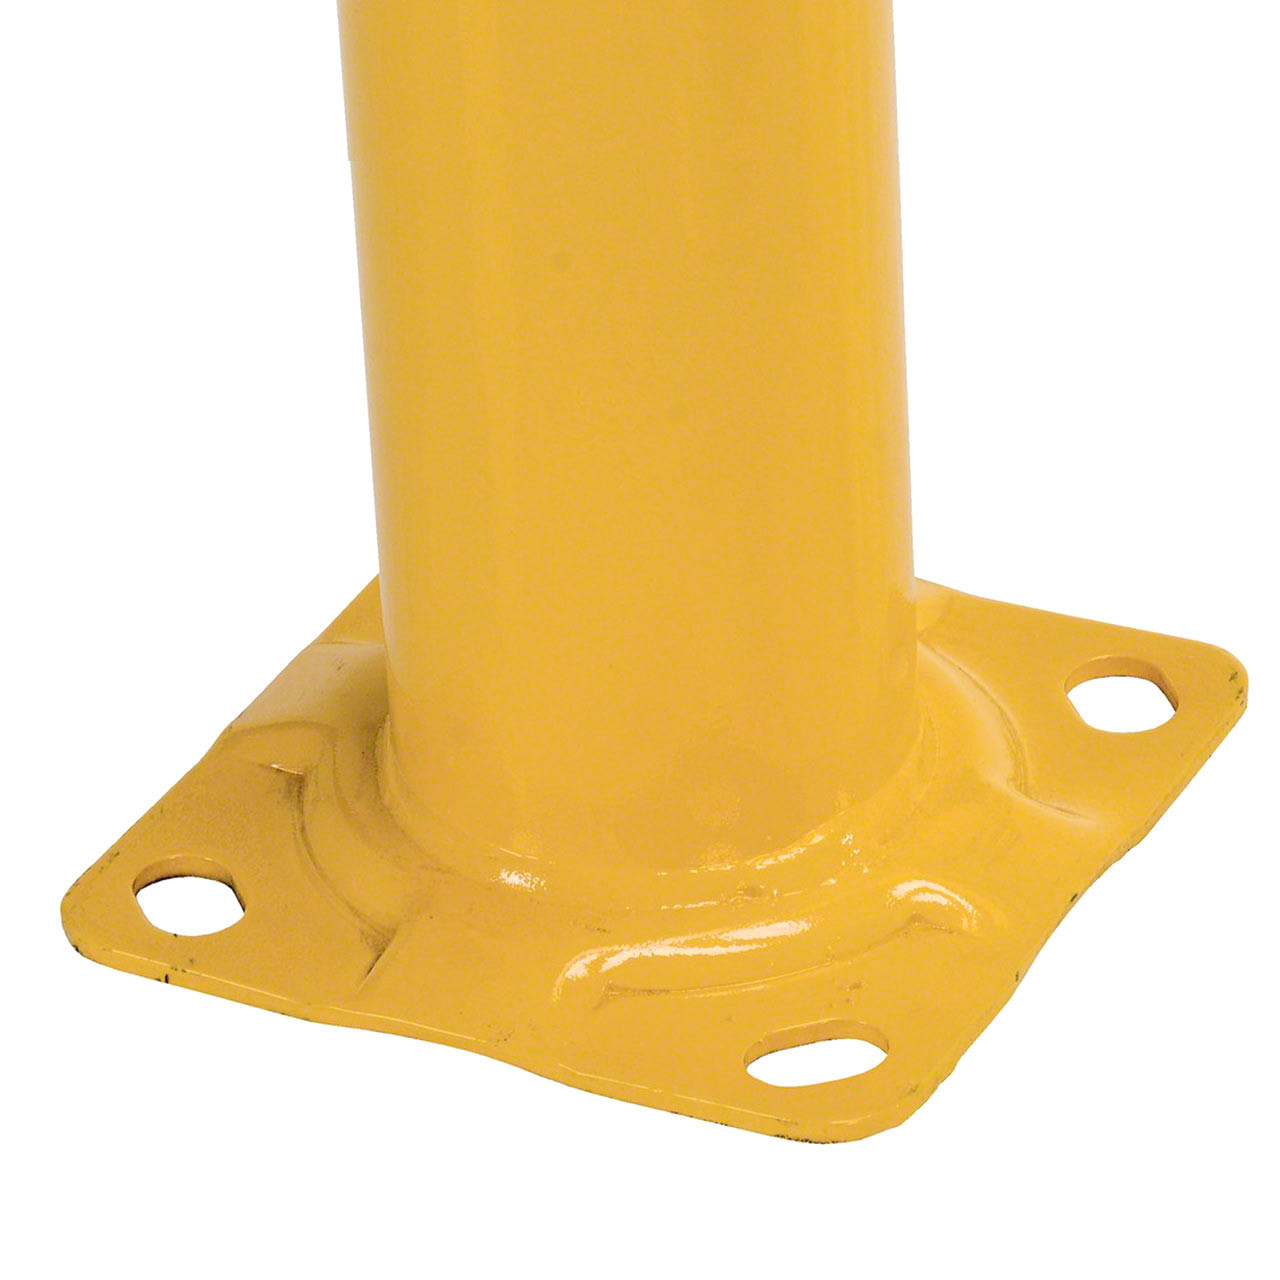 The heavy duty base plate mounts permanently to the floor for true safety